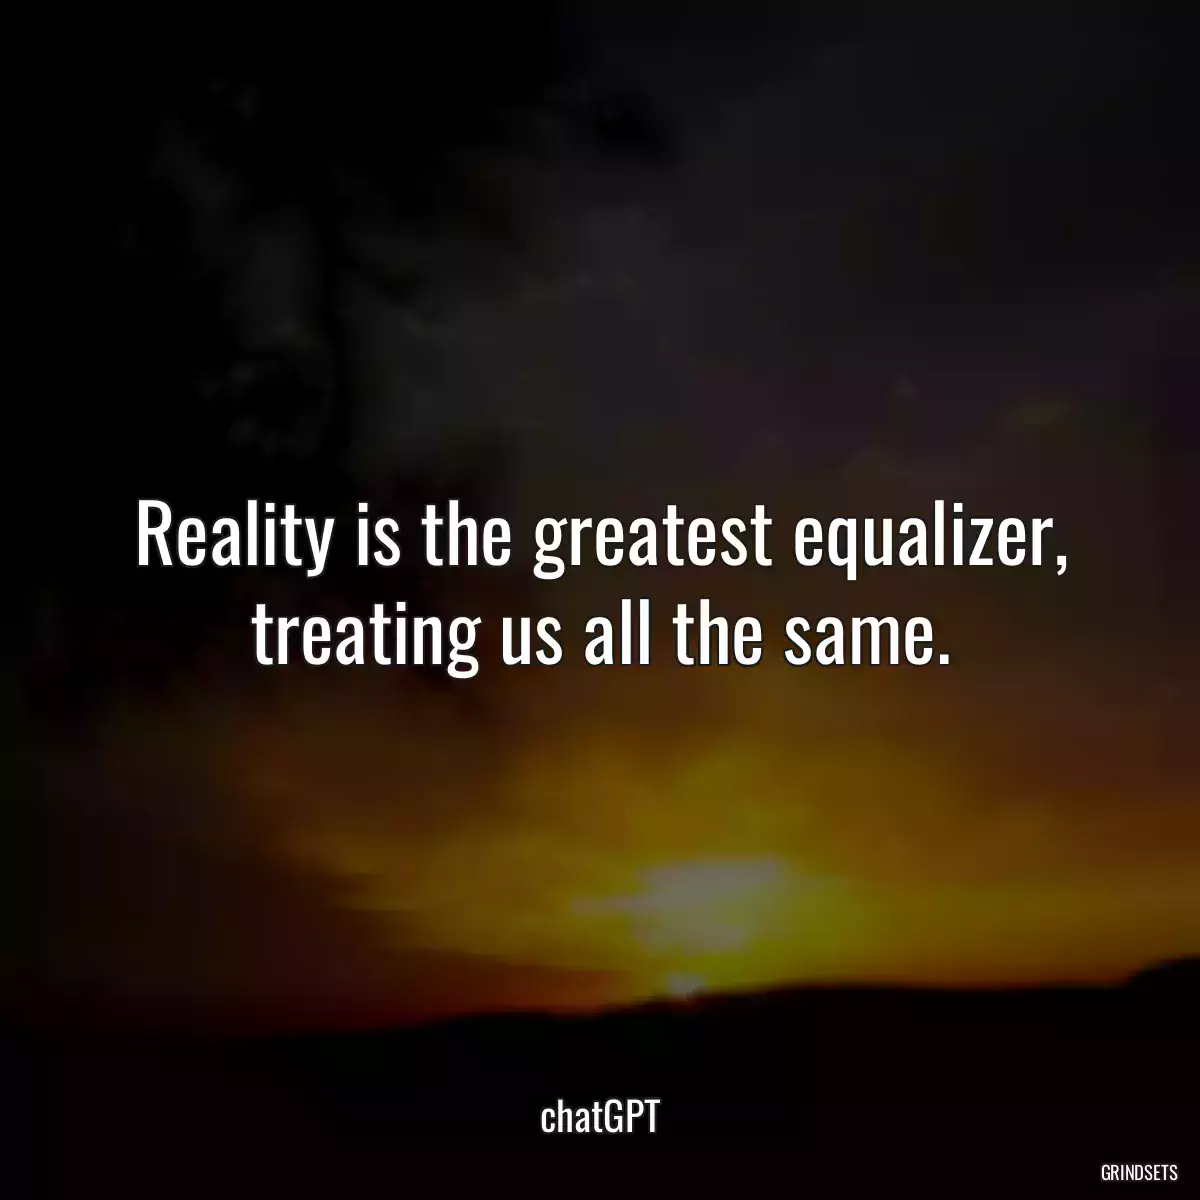 Reality is the greatest equalizer, treating us all the same.